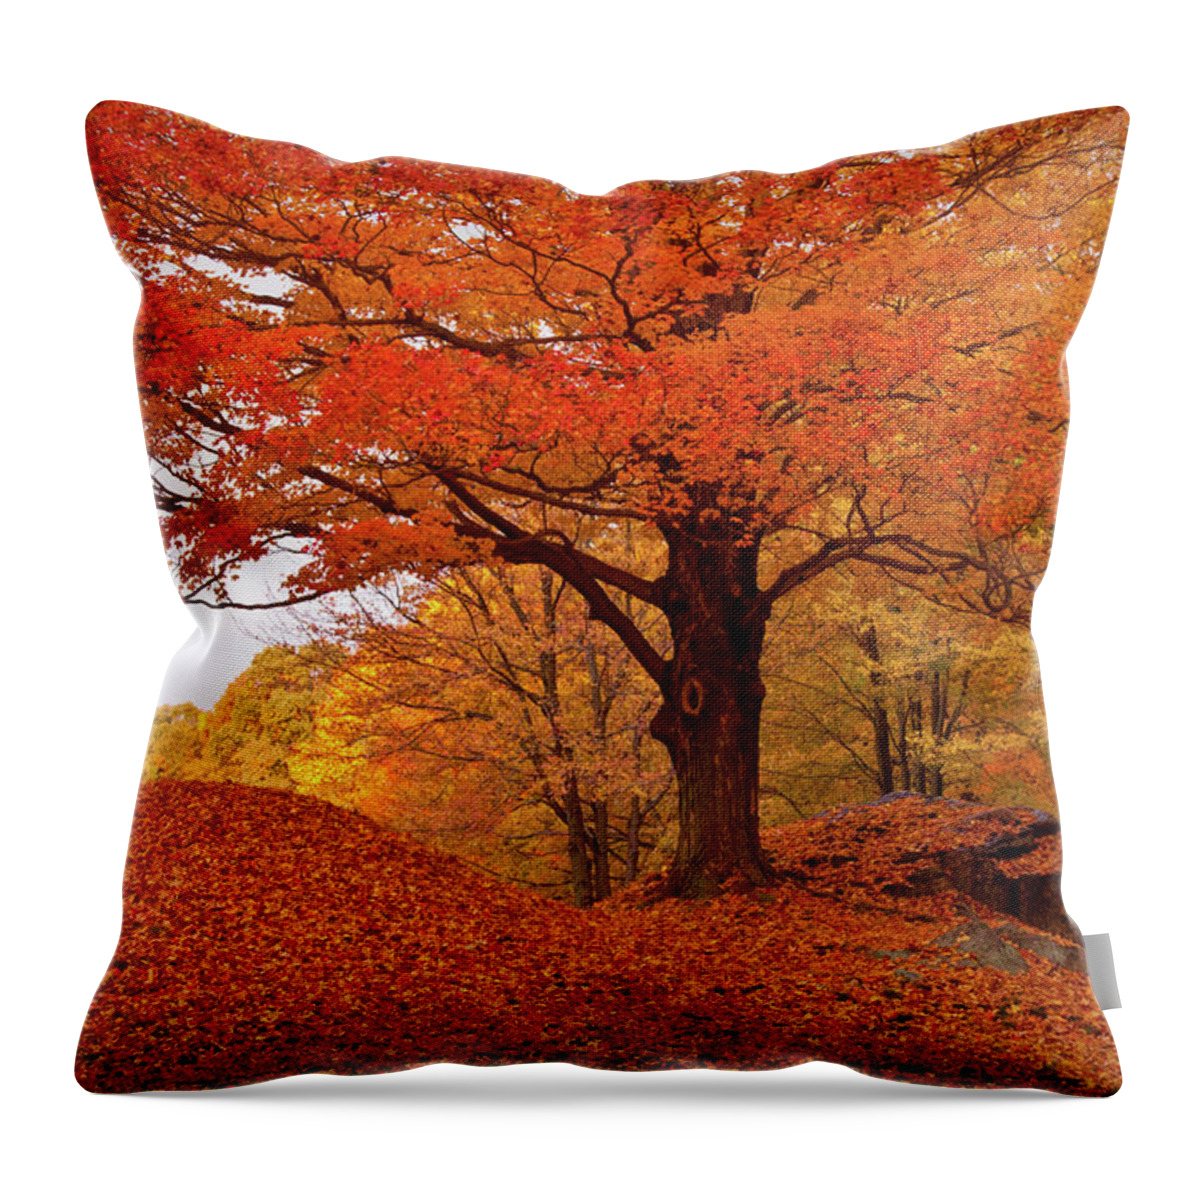 Peabody Massachusetts Throw Pillow featuring the photograph Sturdy Maple in Autumn Orange by Jeff Folger